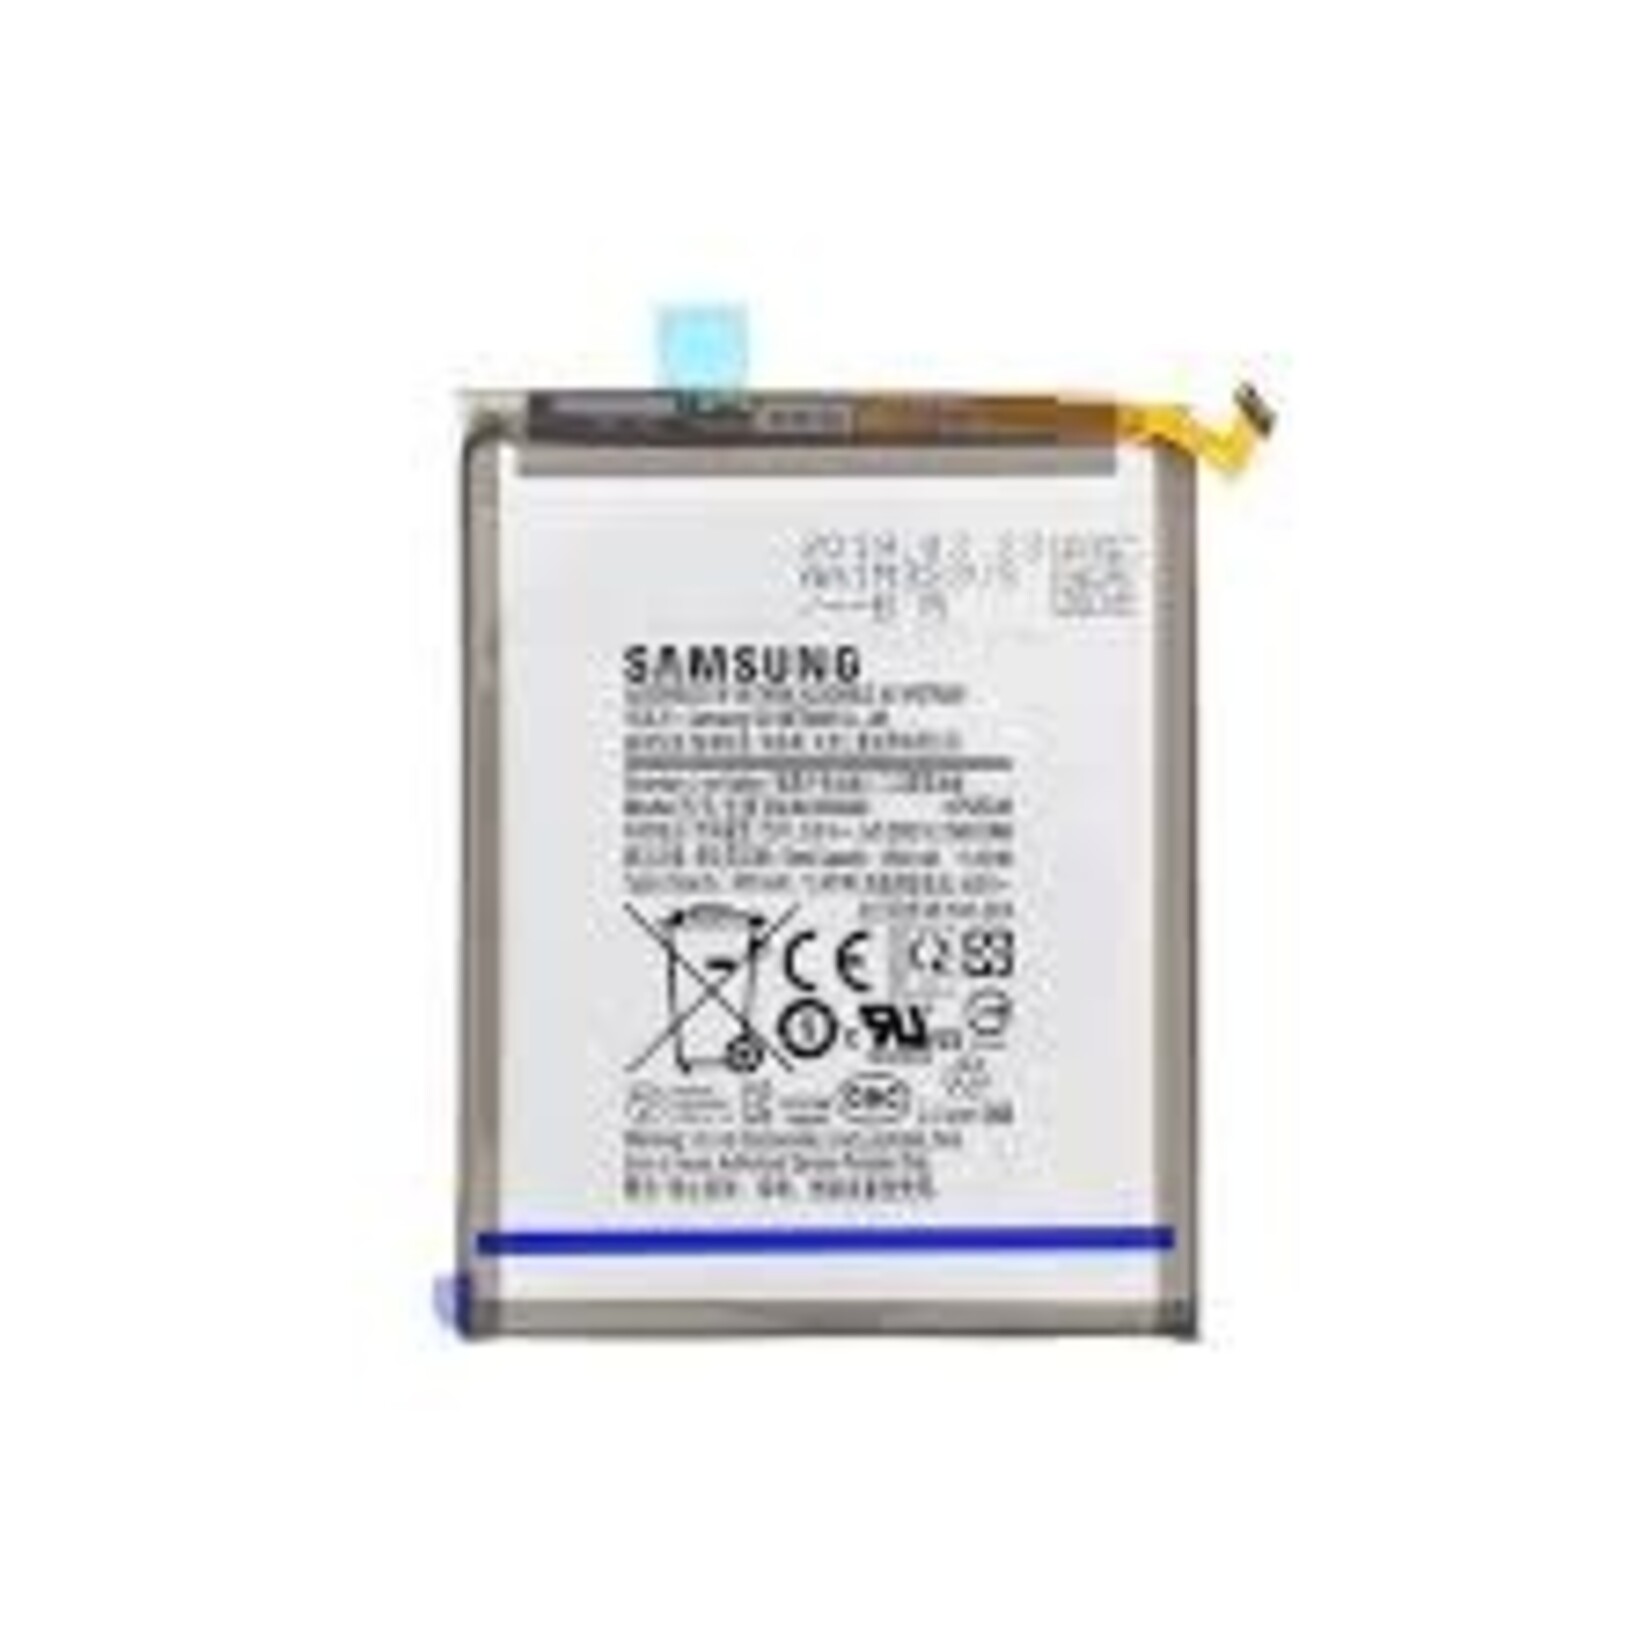 Samsung Replacement battery for Samsung A20 (A205 / 2019) / A30 (A305 / 2019) / A30S (A307 / 2019) / A50 (A505 / 2019) / A50S (A507 / 2019)